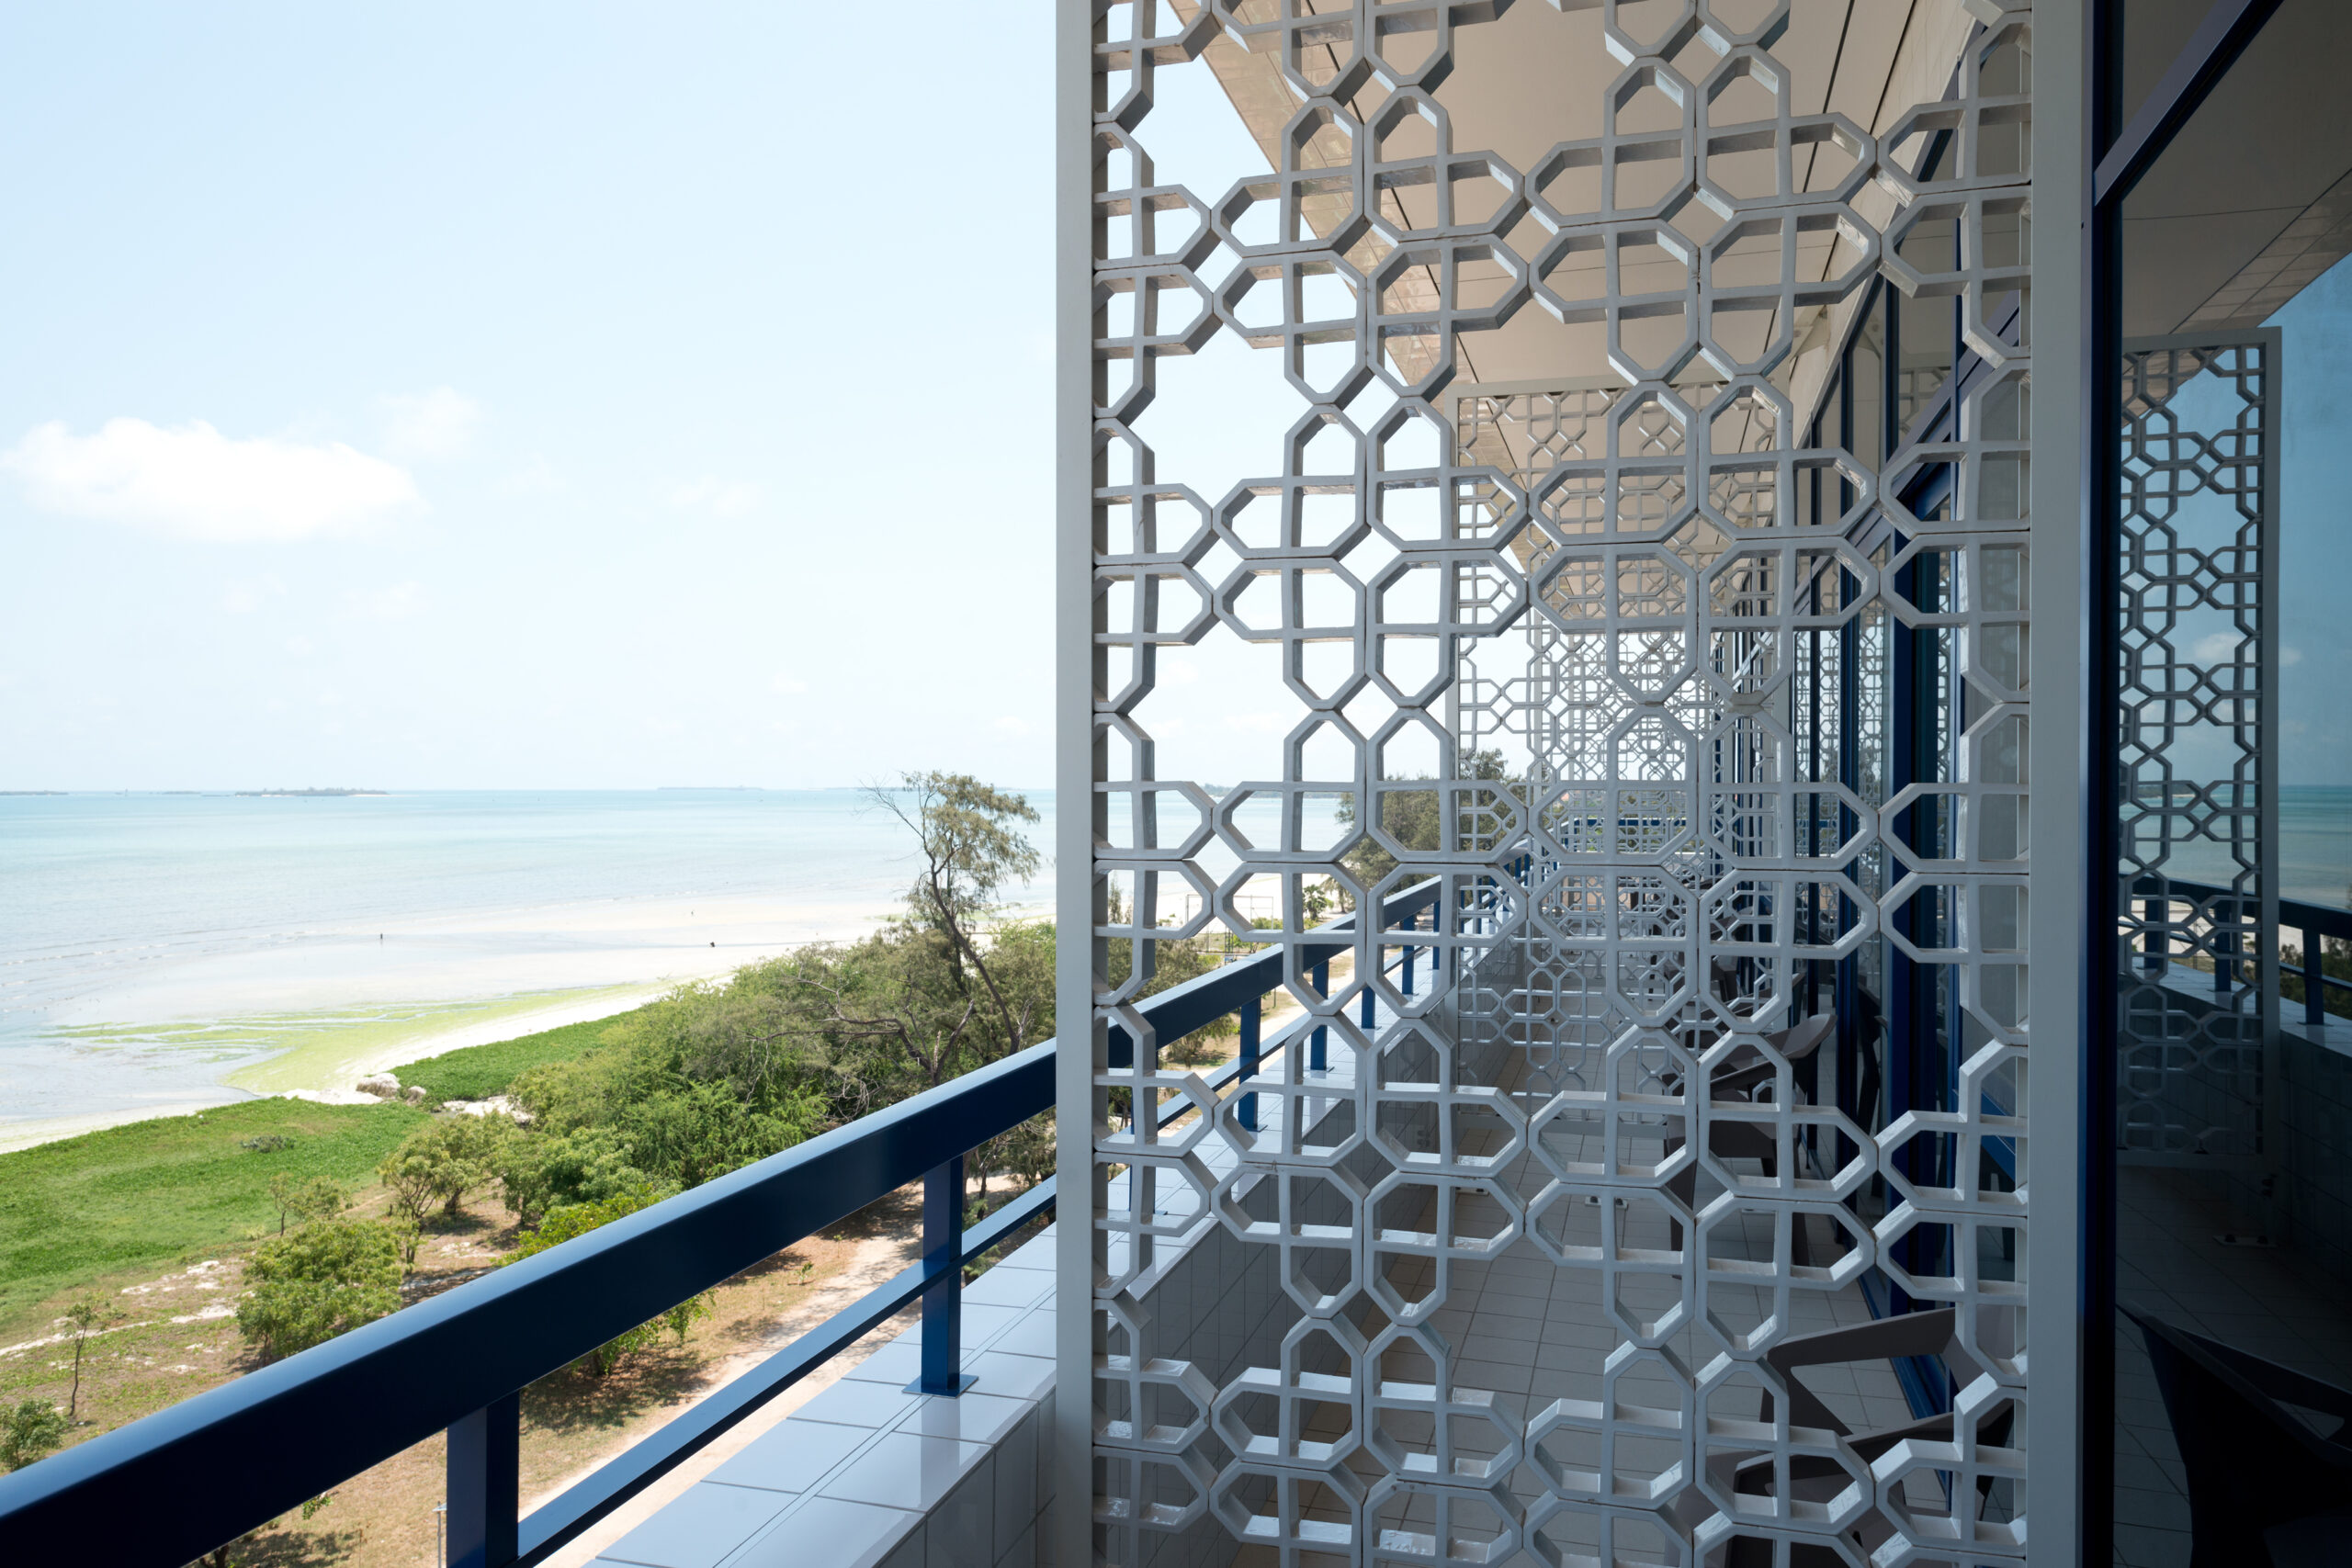 Ocean view from balconies on Phase 2 building and decorative screen dividers